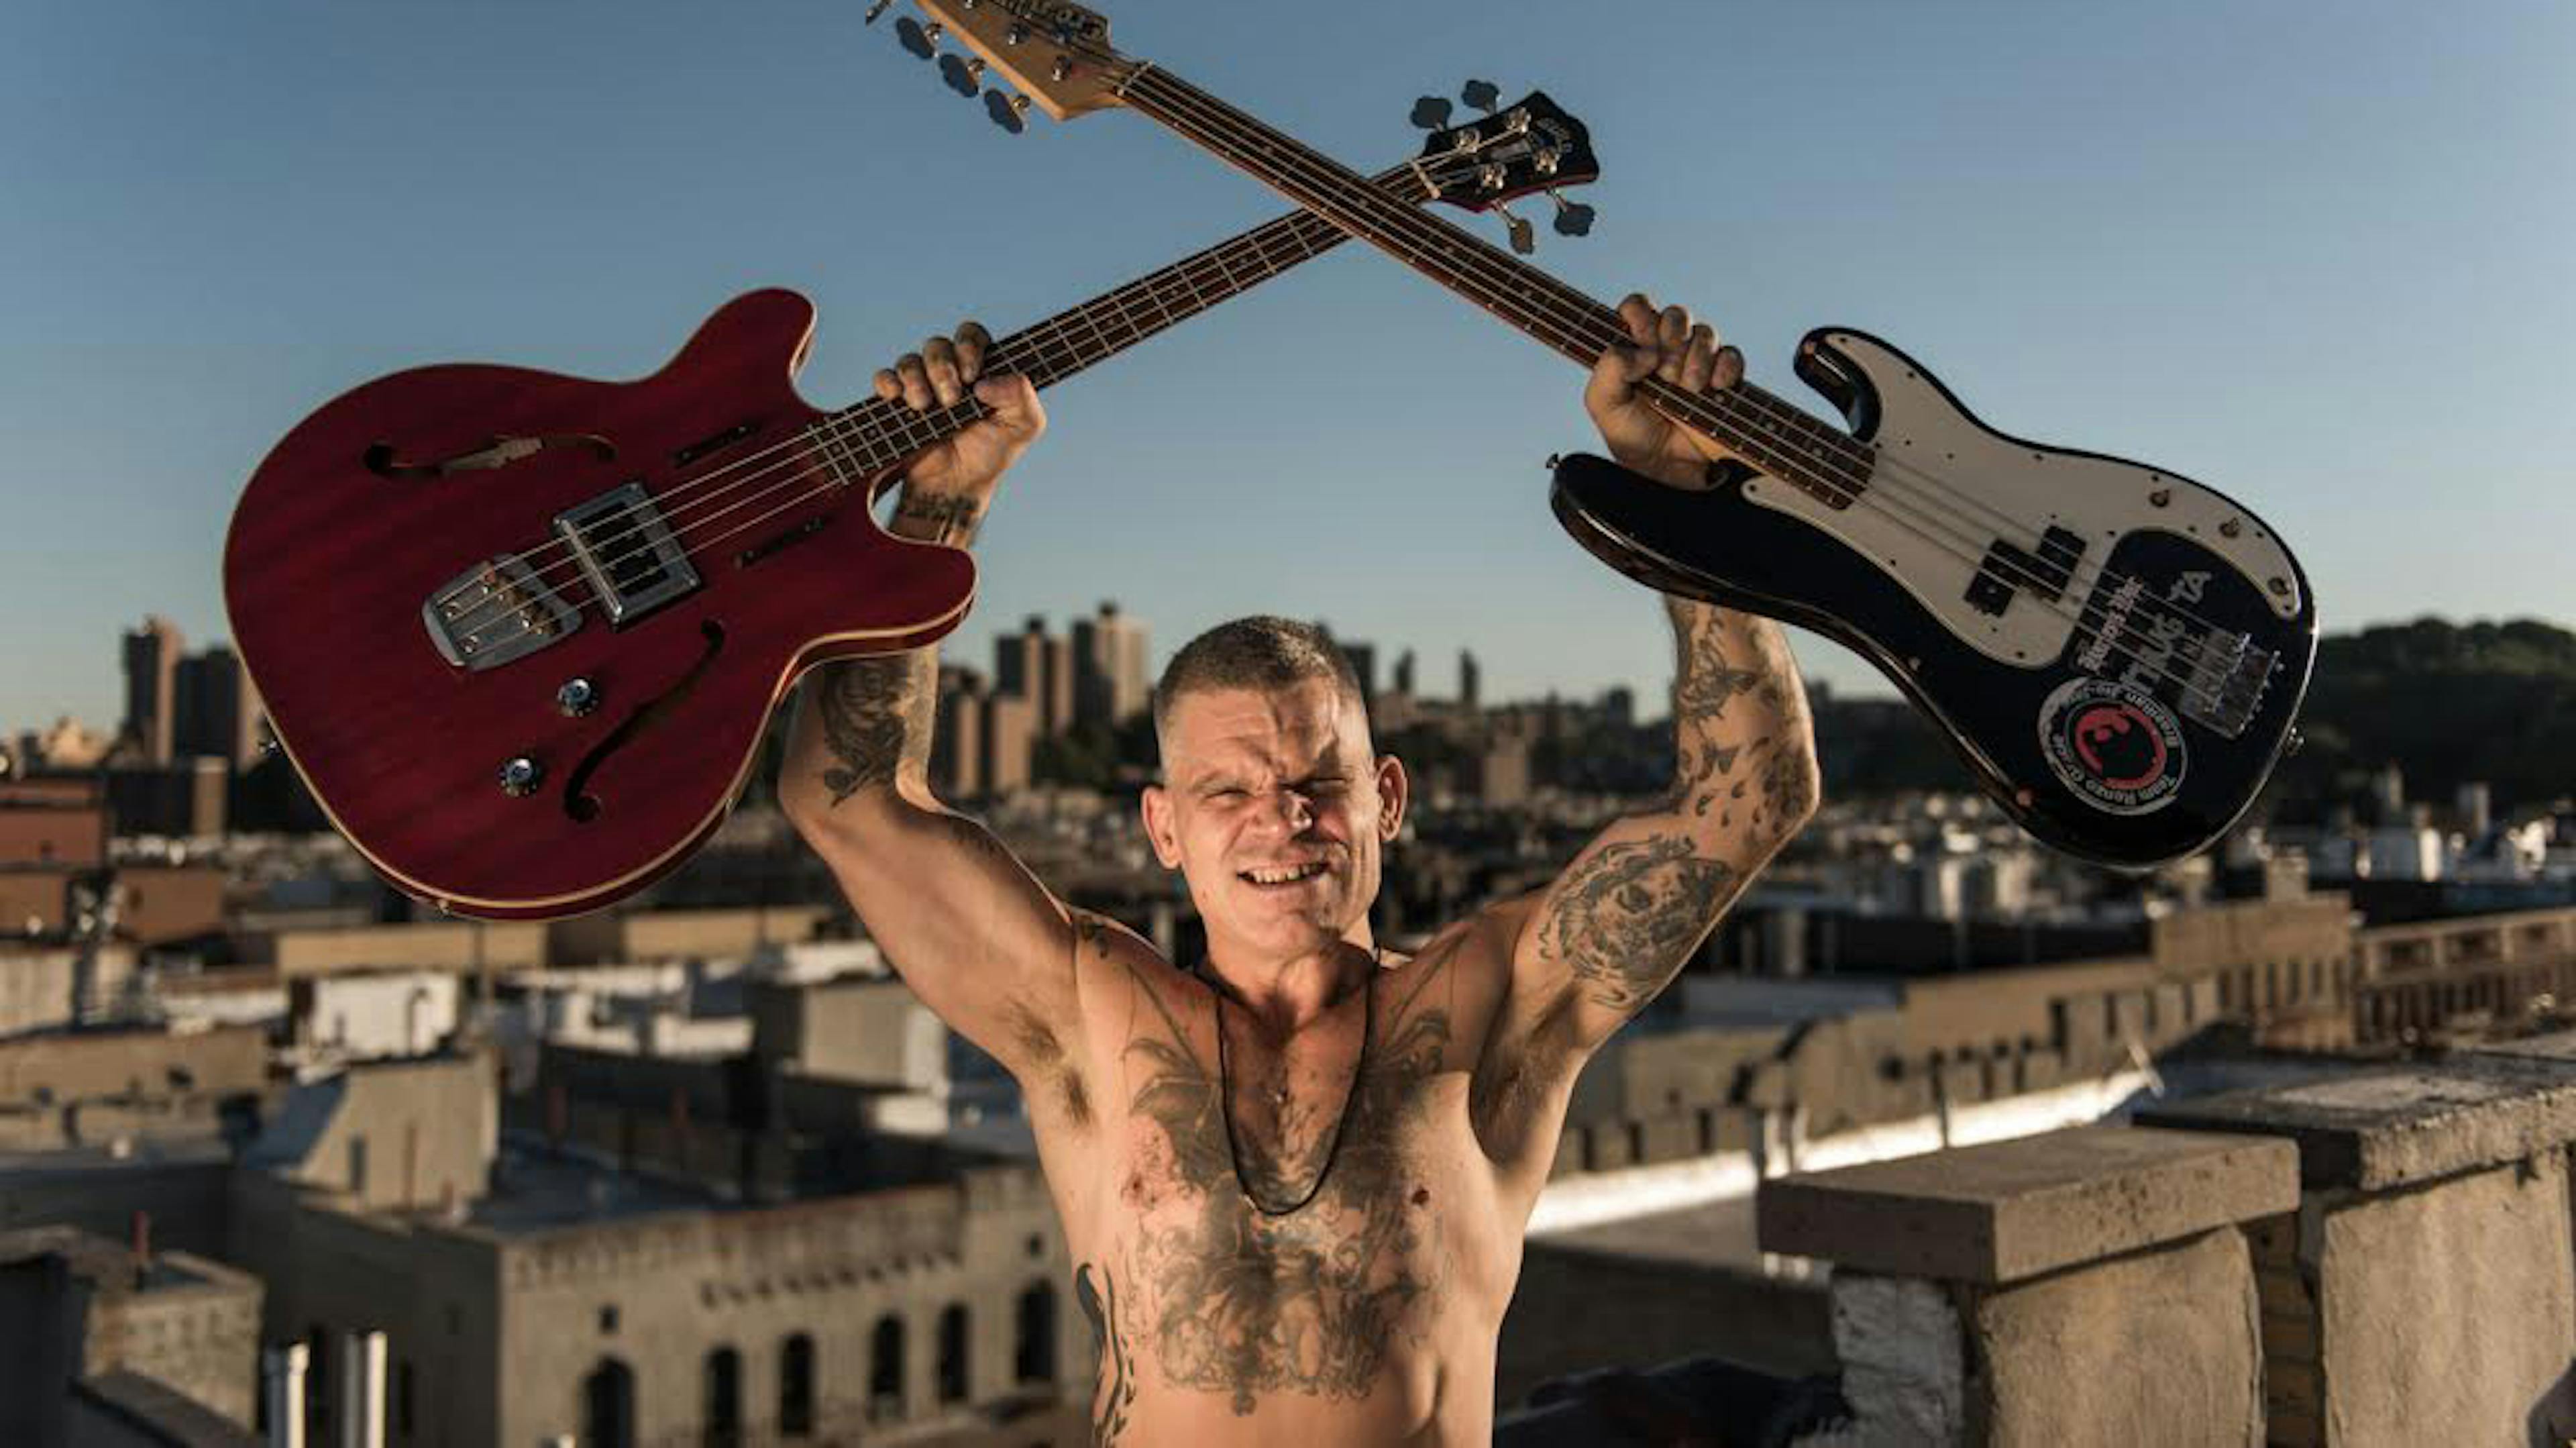 Cro-Mags' Harley Flanagan: "The First Time I Did Crystal Meth Was With Lemmy"